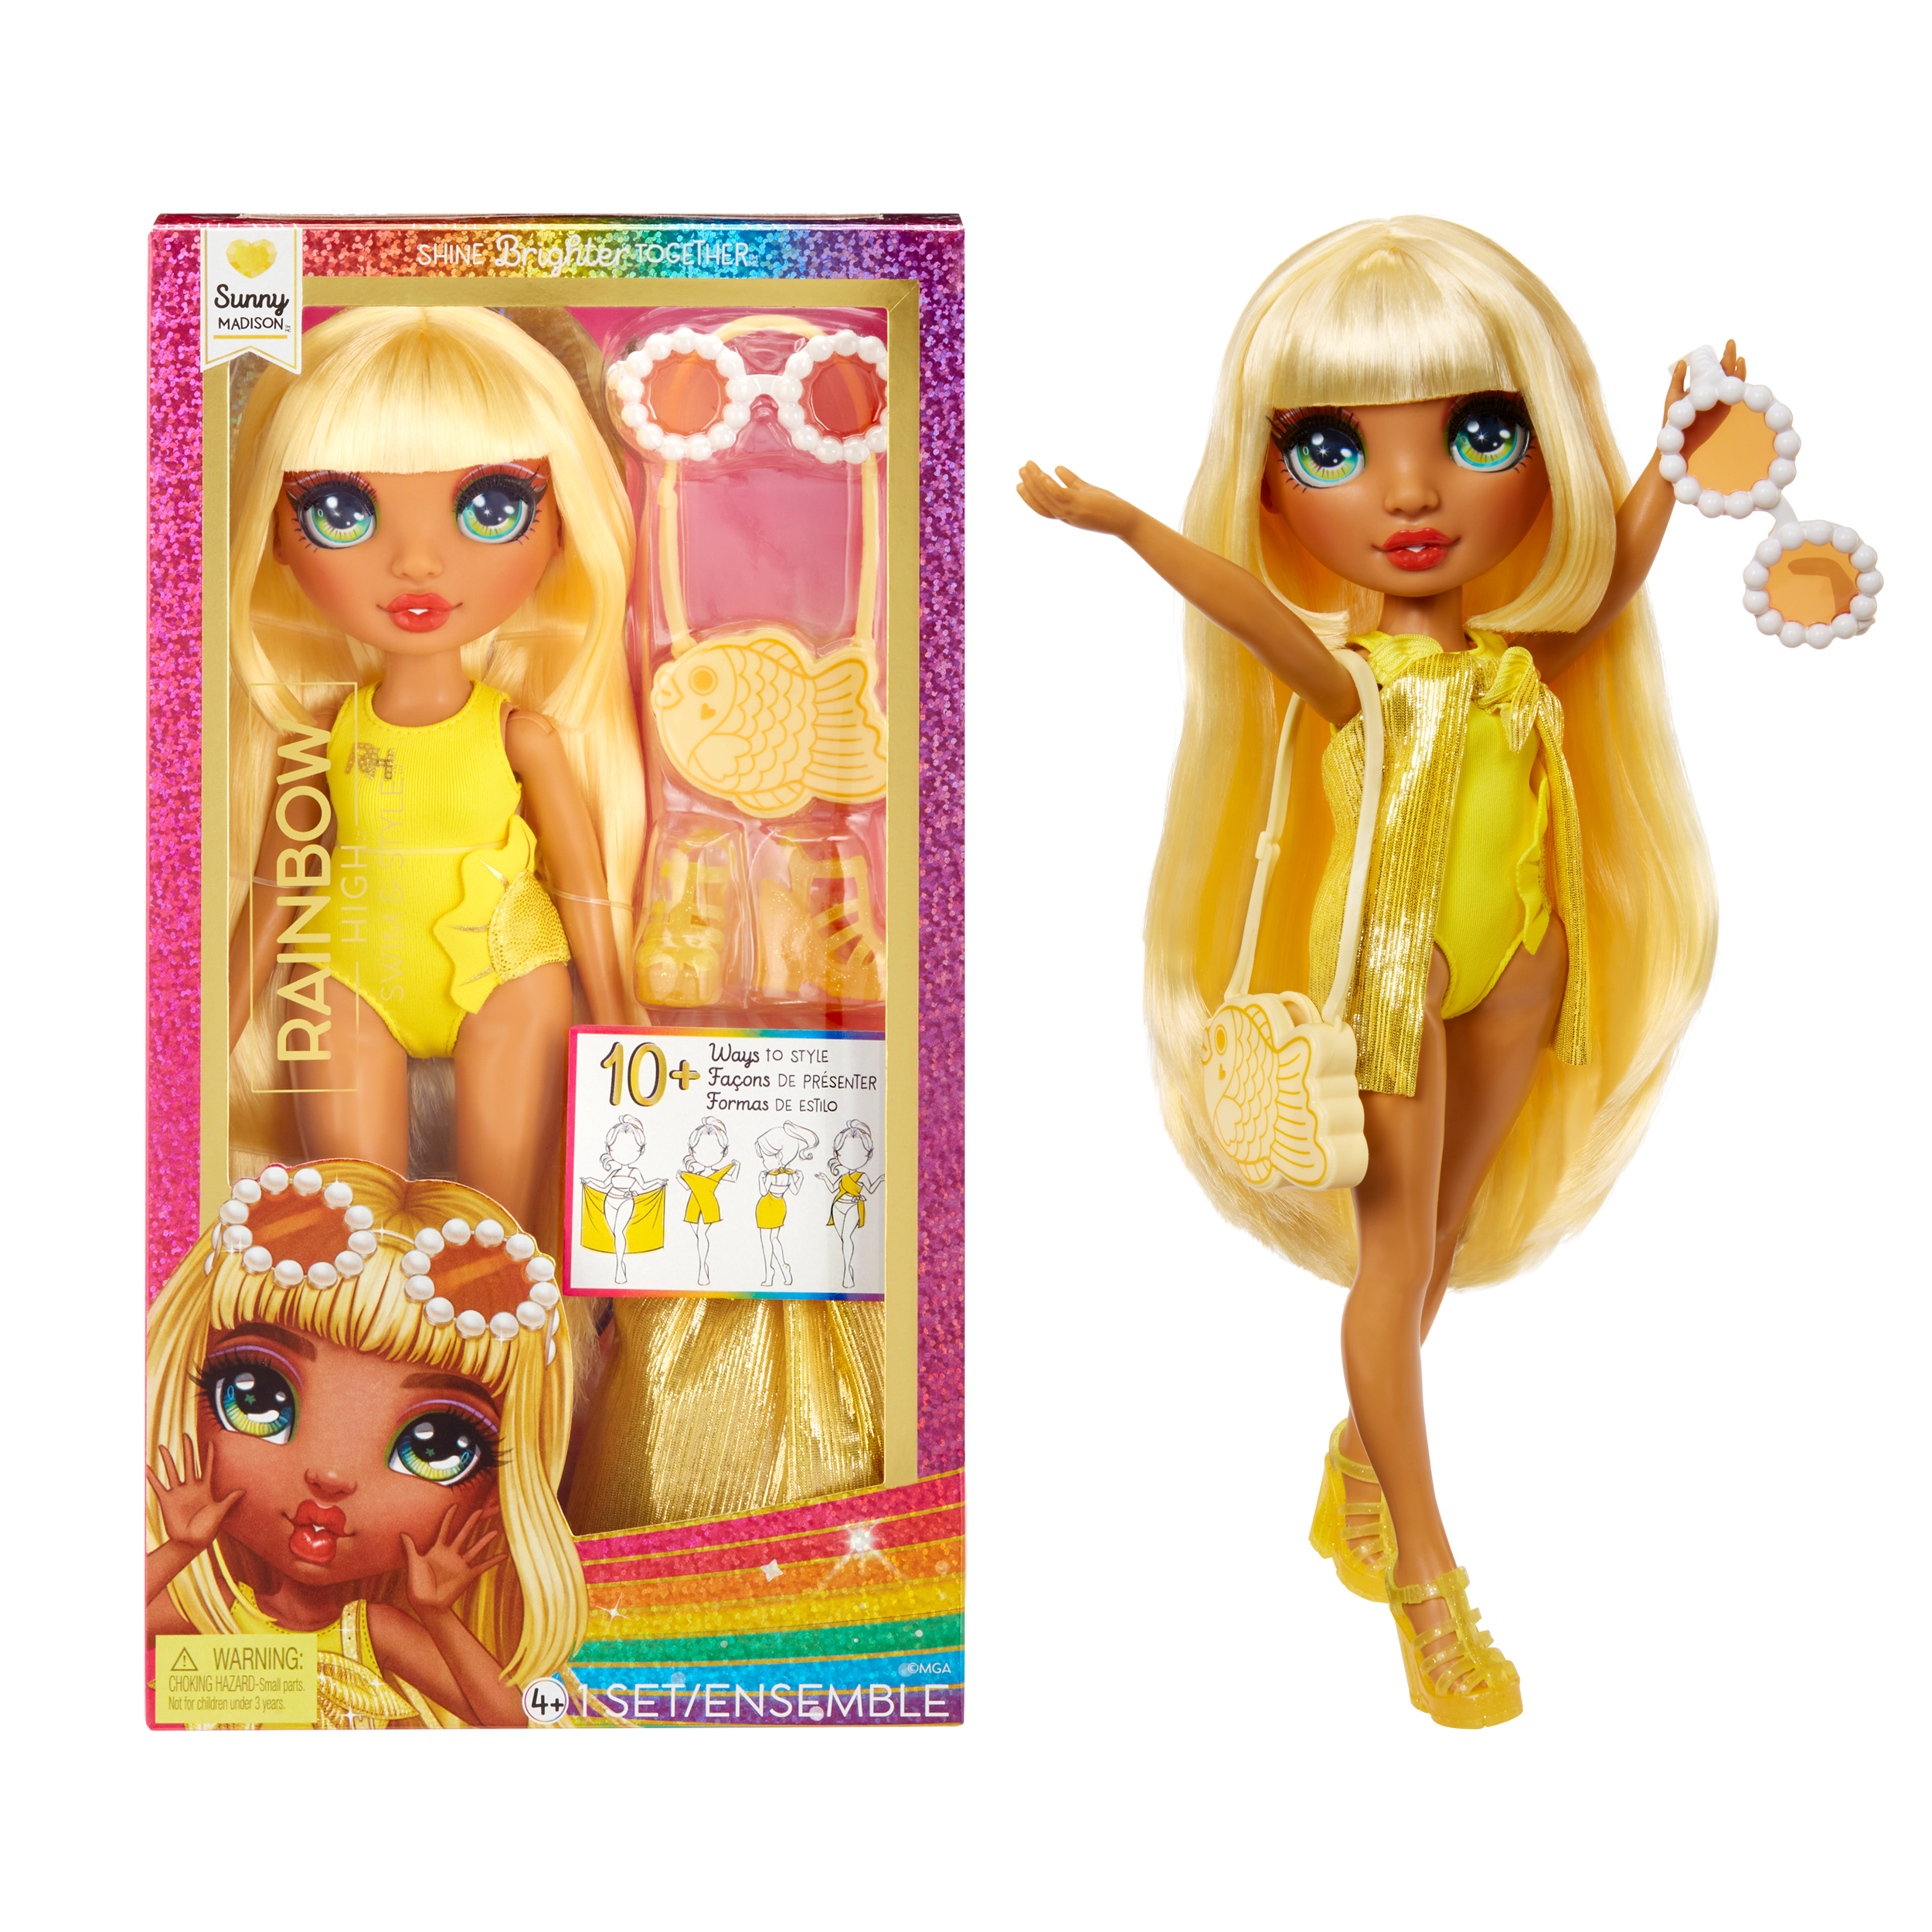 Rainbow High Swim & Style Sunny, Yellow 11? Doll, Removable Swimsuit, Wrap, Sandals, Fun Play Accessories. Kids Toy Gift Ages 4-12 - image 1 of 8